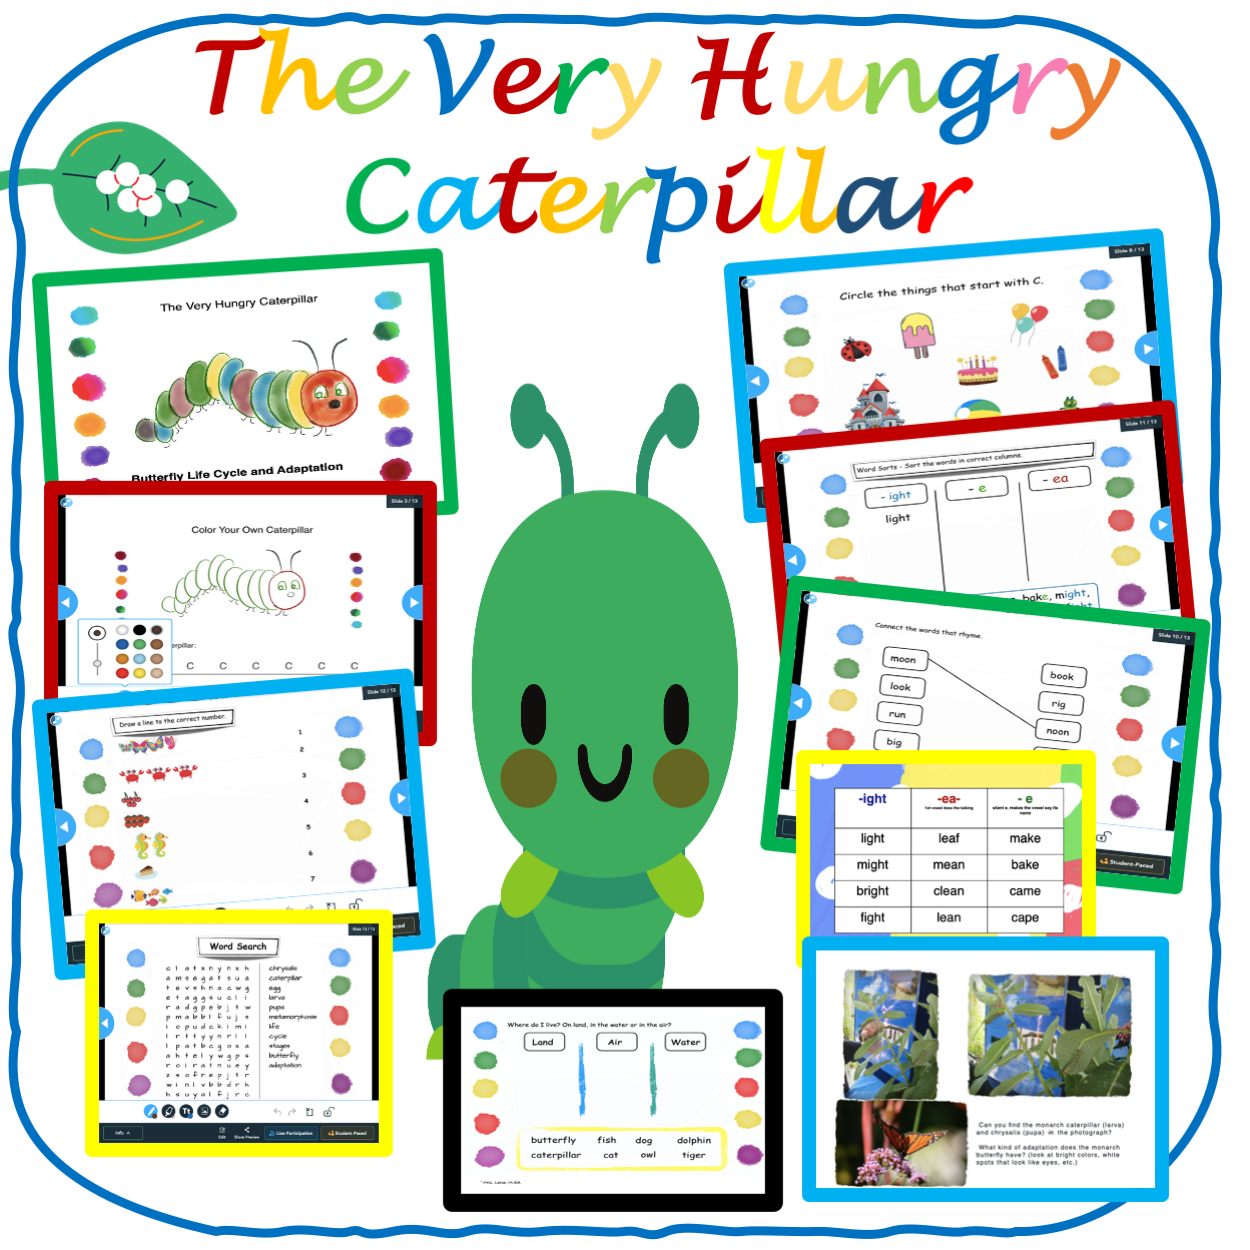 The Very Hungry Caterpillar - by Eric Carle - Pdf & Nearpod Lesson Plan